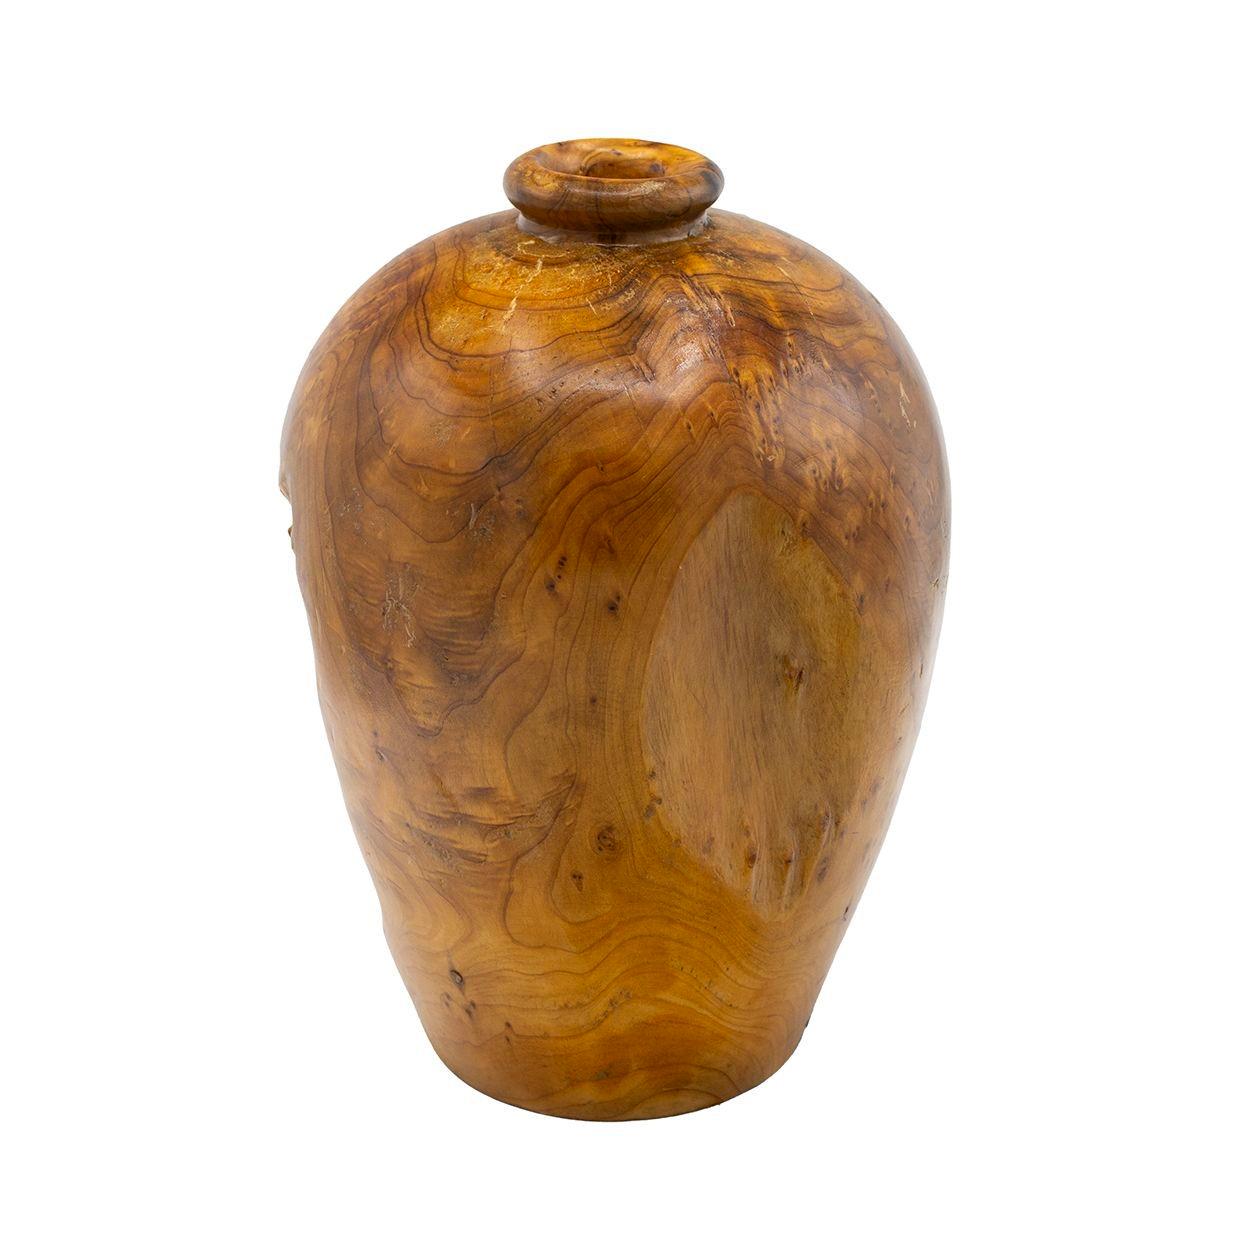 Estate find- vintage burlwood vessel in Chinese fir. Beautiful organic form.
Base retains a label- 'Nimble Creation- Hand carved from the roots of Chinese fir.
through the initiative of local farmers and artisans, the roots of the Chinese fir tree